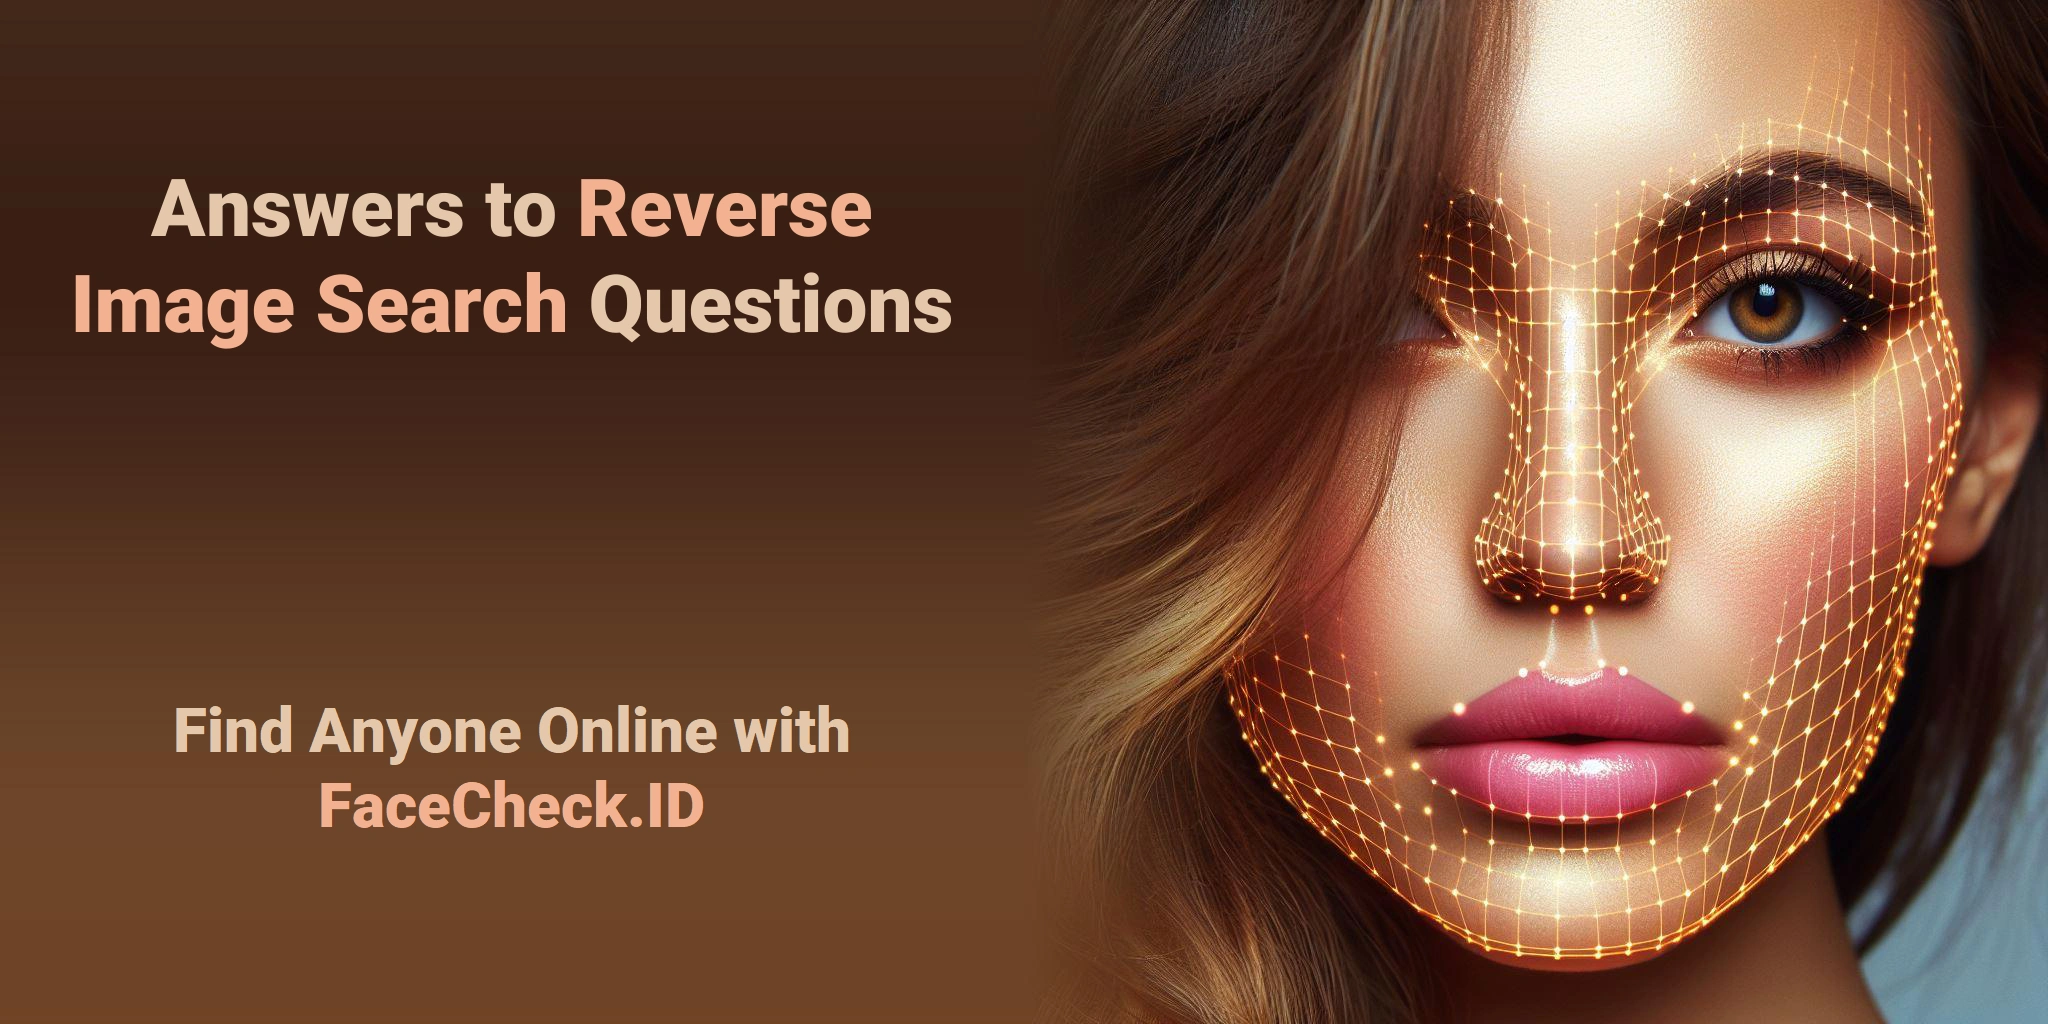 AI Facial Recognition And Reverse Image Search Tool For Online Safety - FaceCheck  ID